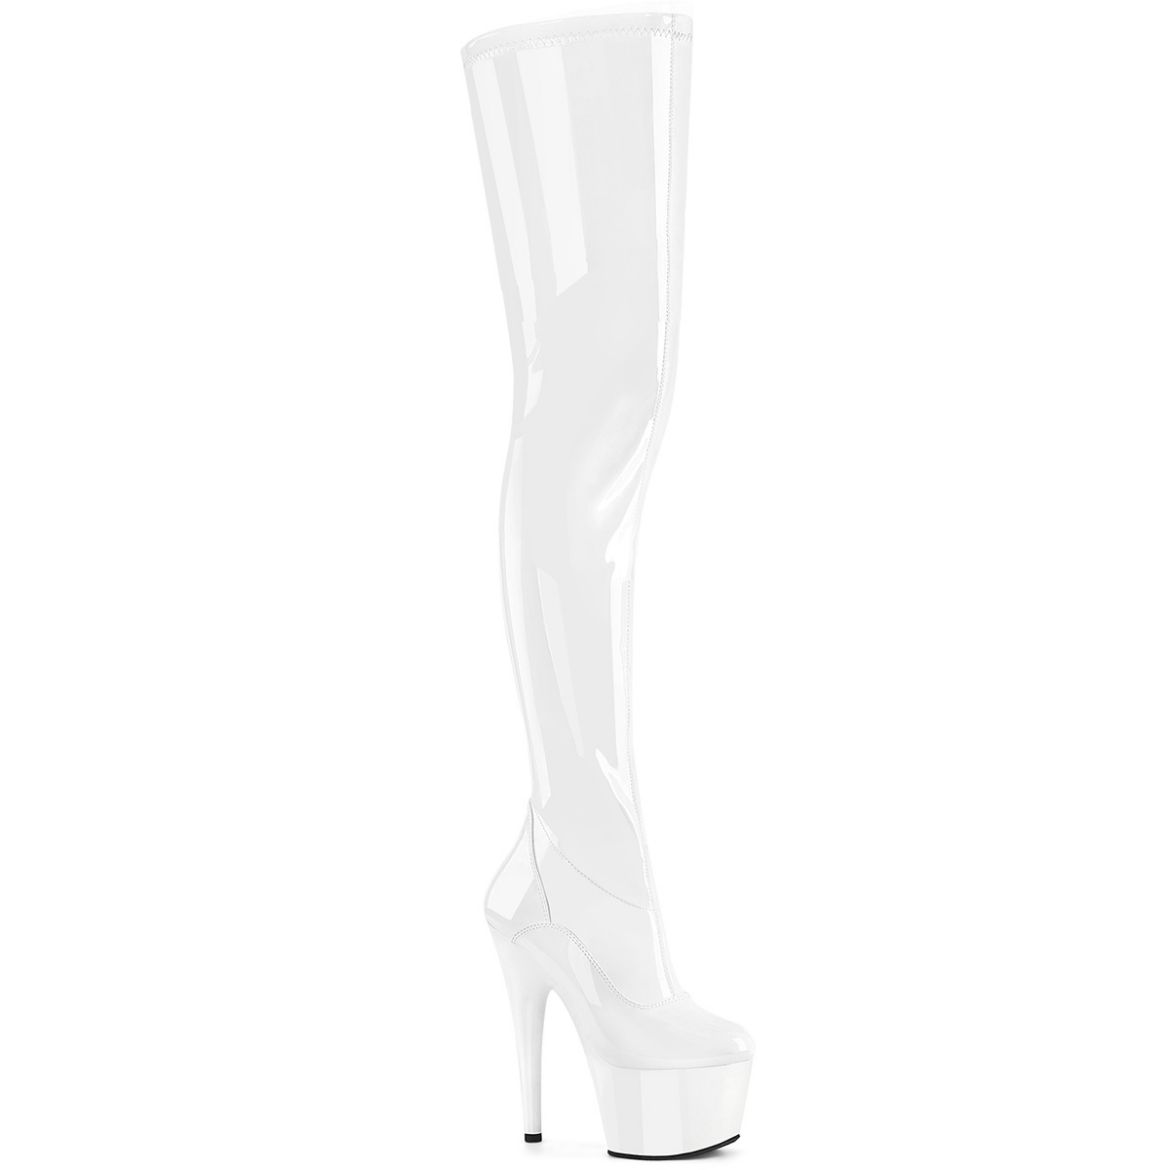 Product image of Pleaser ADORE-4000 Wht Str Pat/Wht 7 Inch Heel 2 3/4 Inch PF Stretch Crotch Boot Side Zip